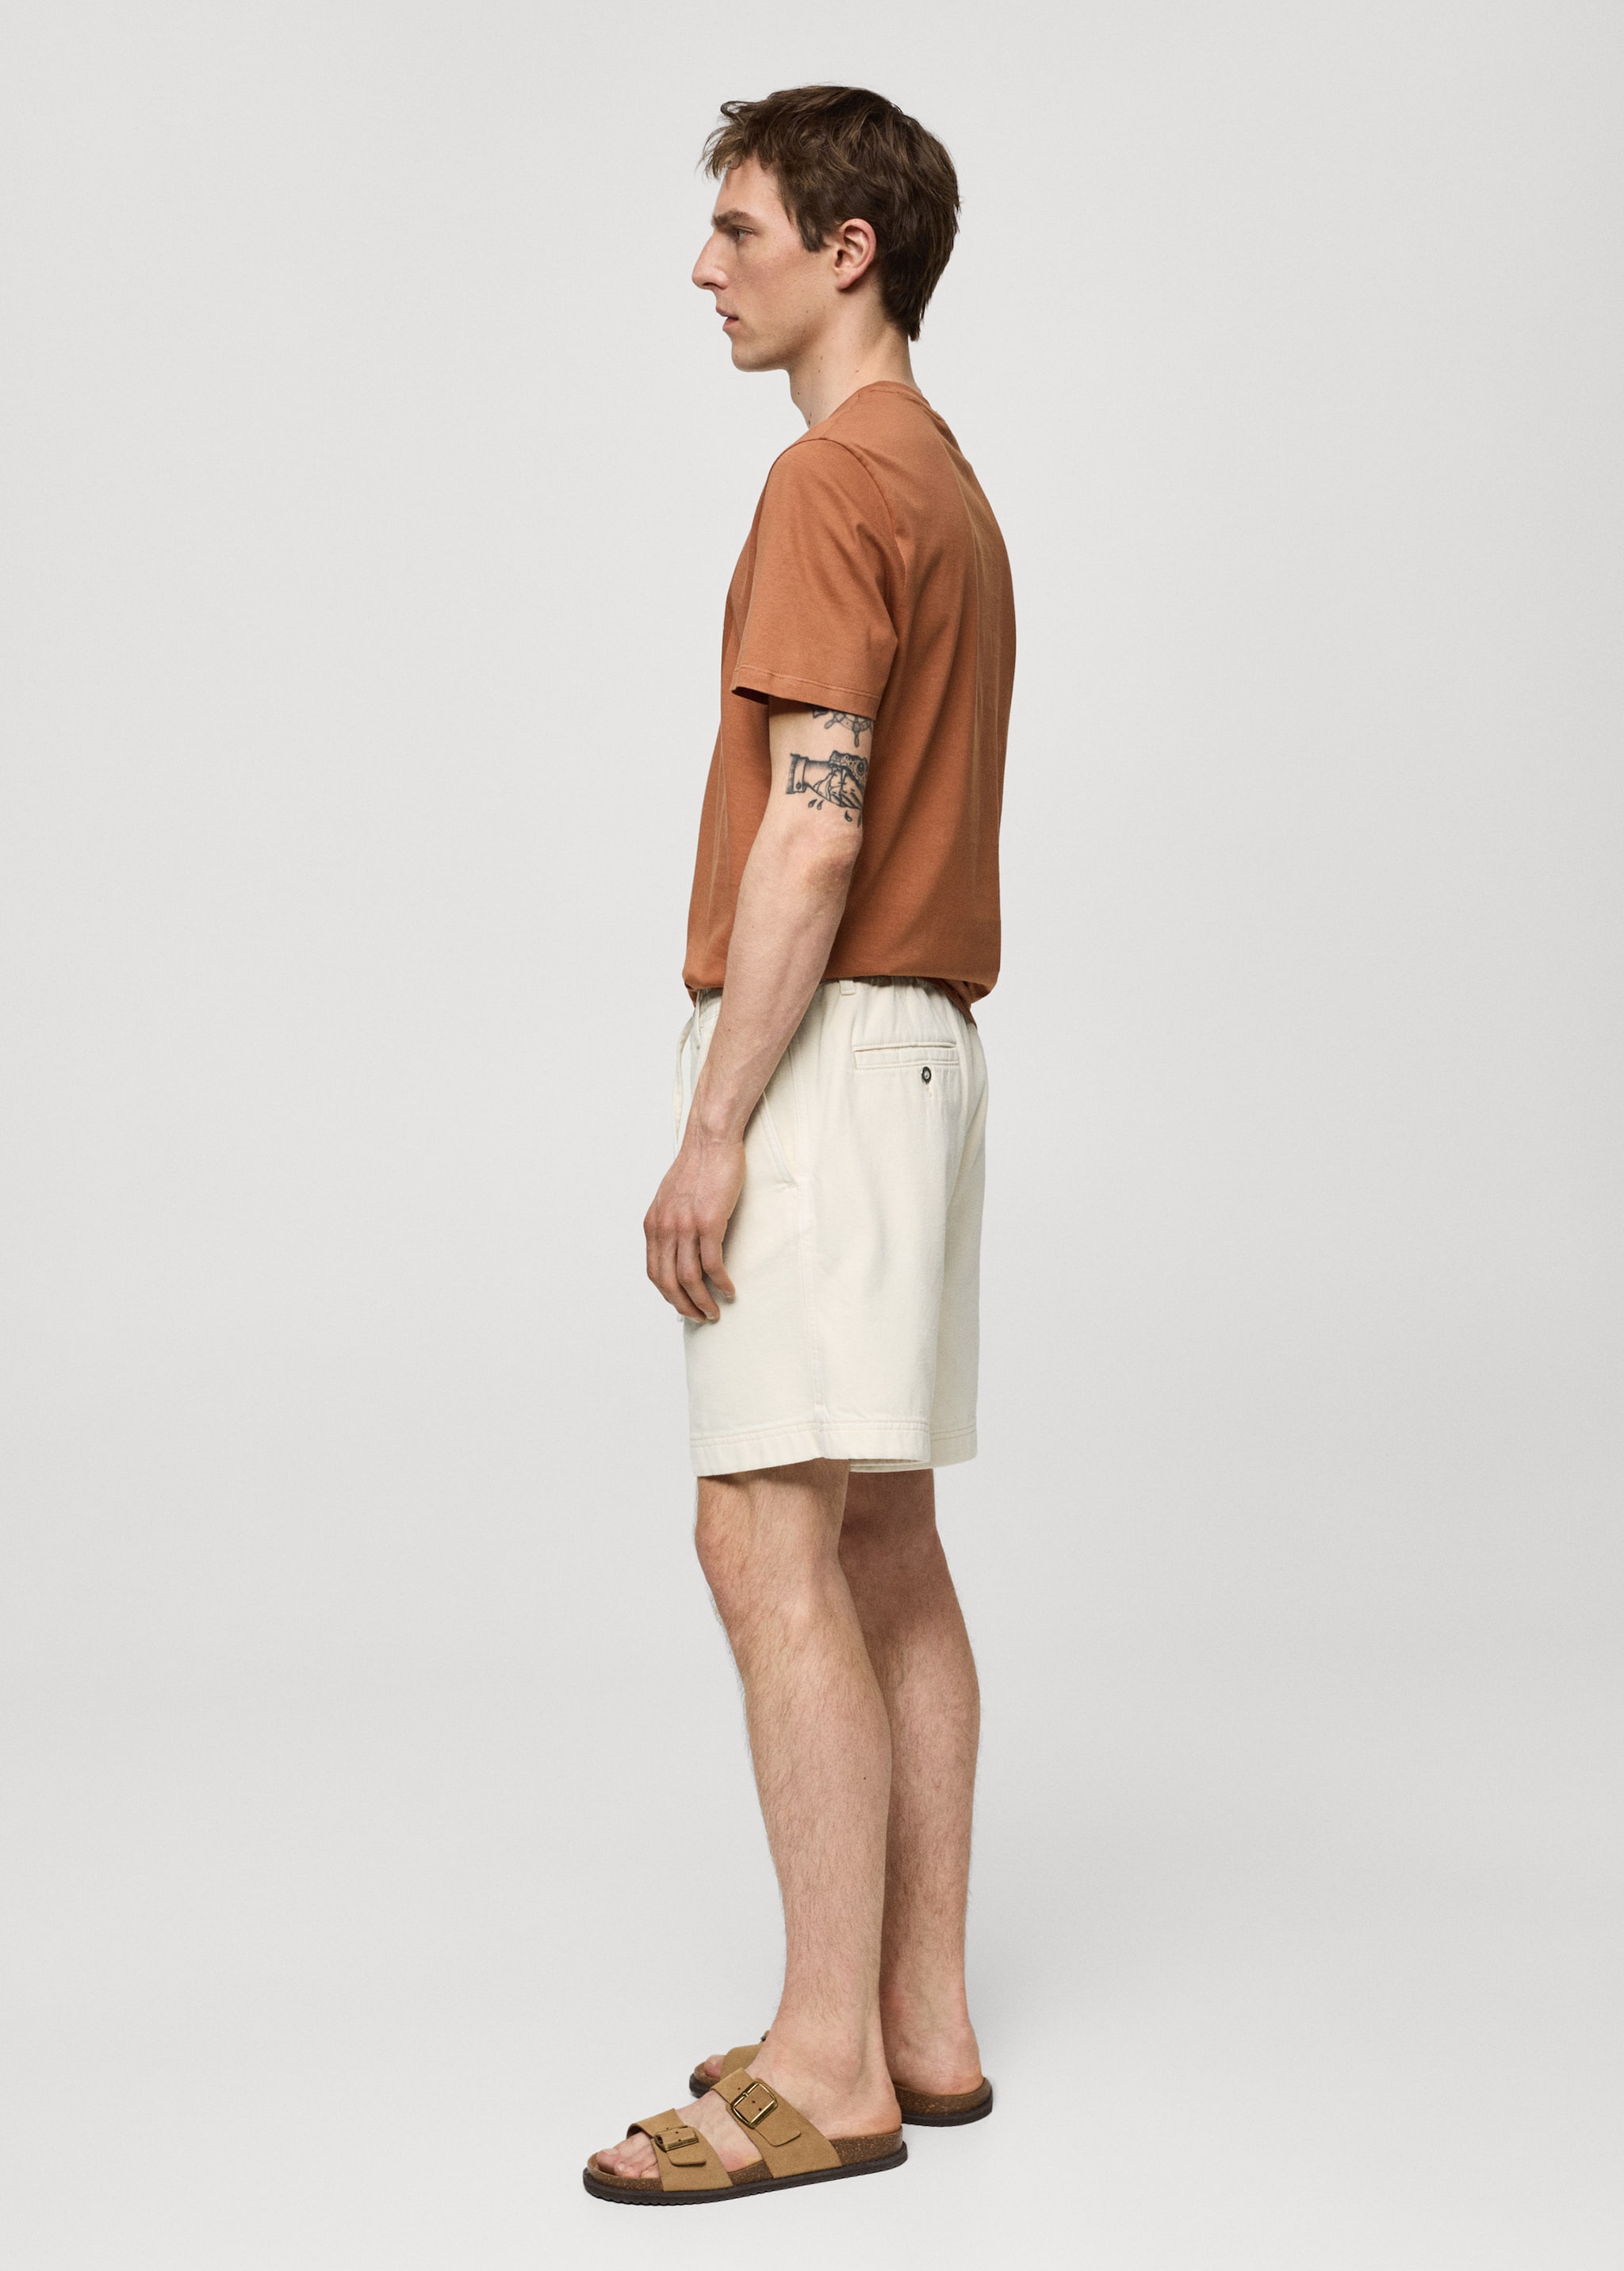 100% cotton drawstring Bermuda shorts - Details of the article 6